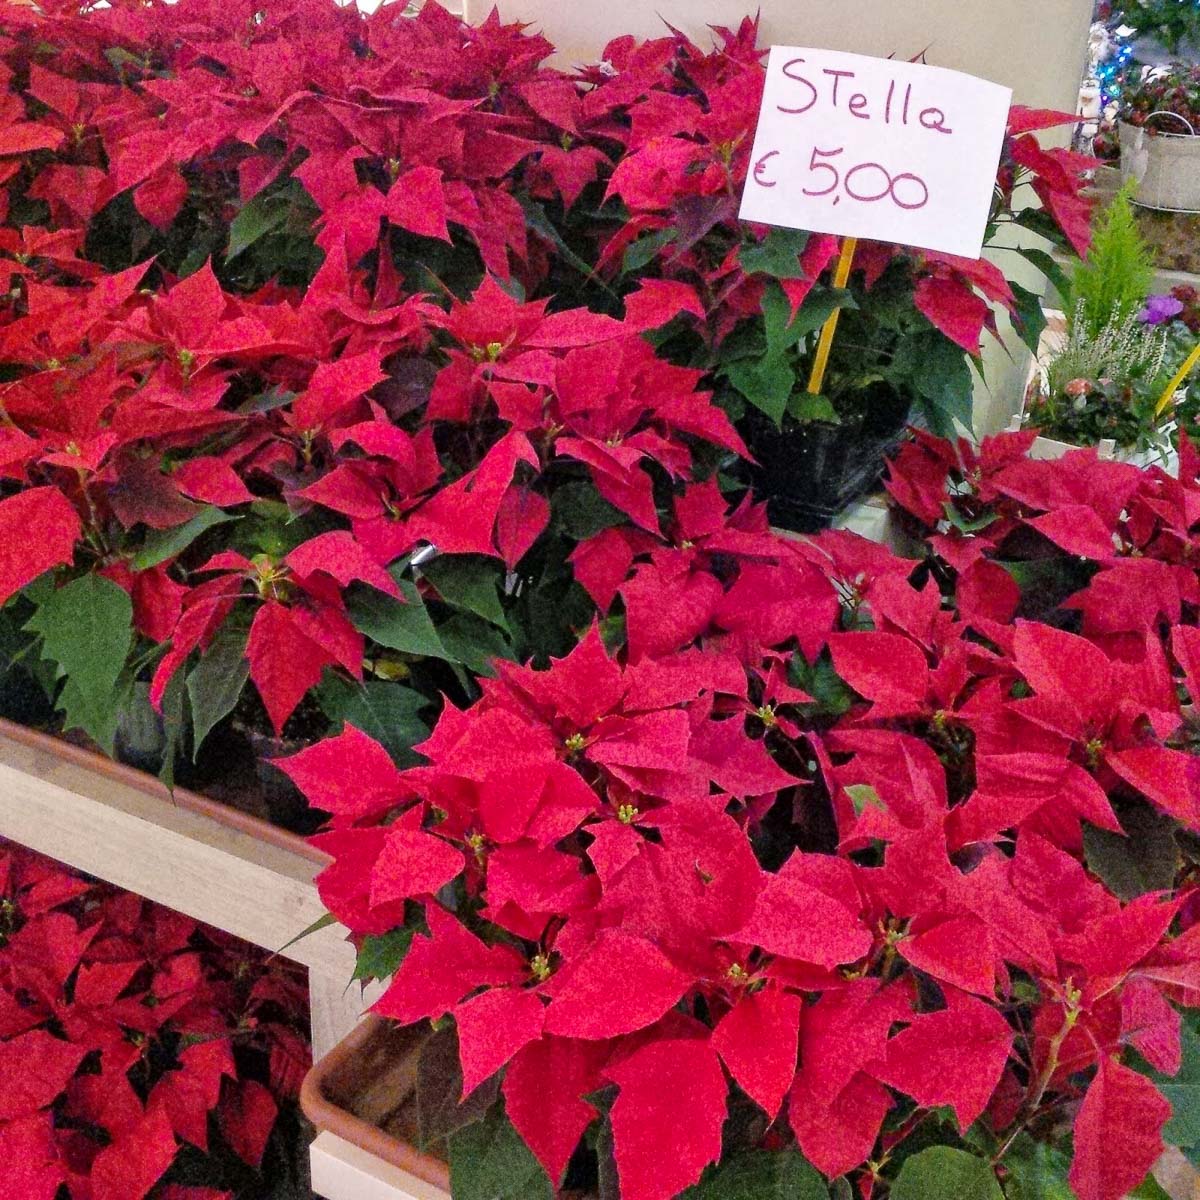 A display of poinsettias in a shop - Vicenza, Italy - rossiwrites.com